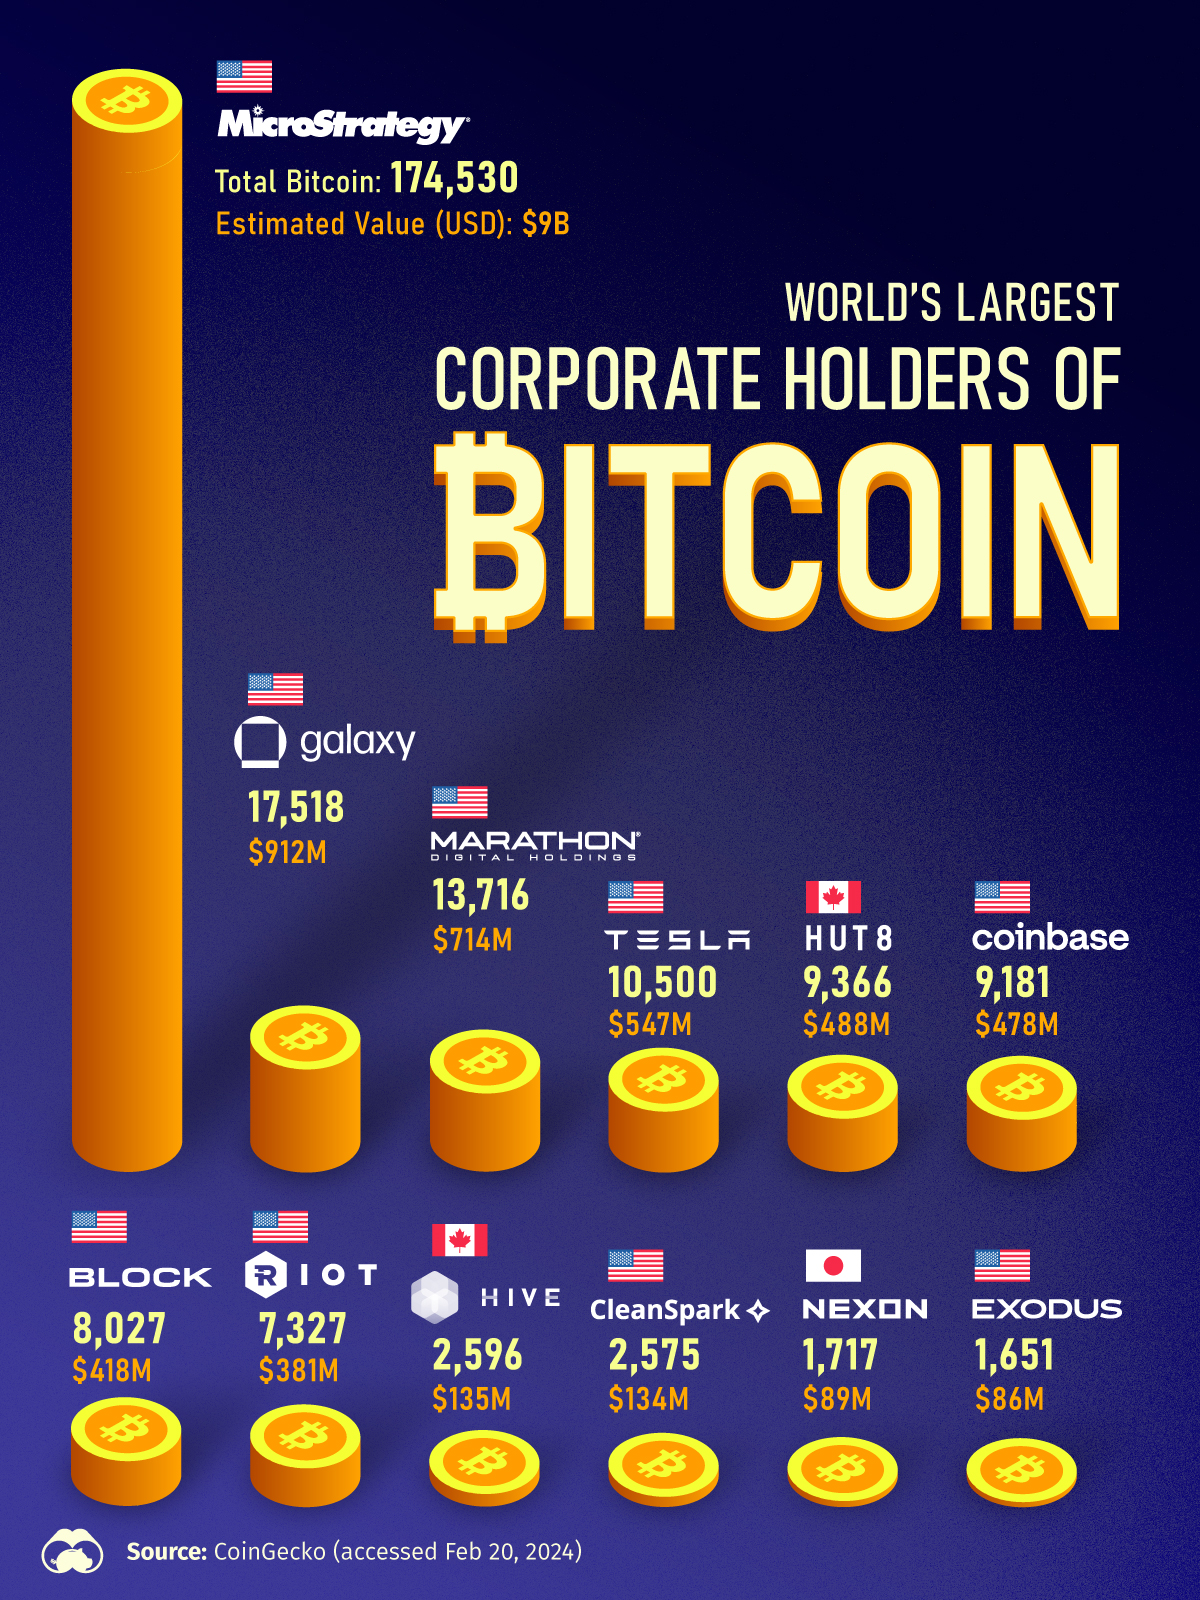 This bar chart shows who holds the most bitcoins by public companies.